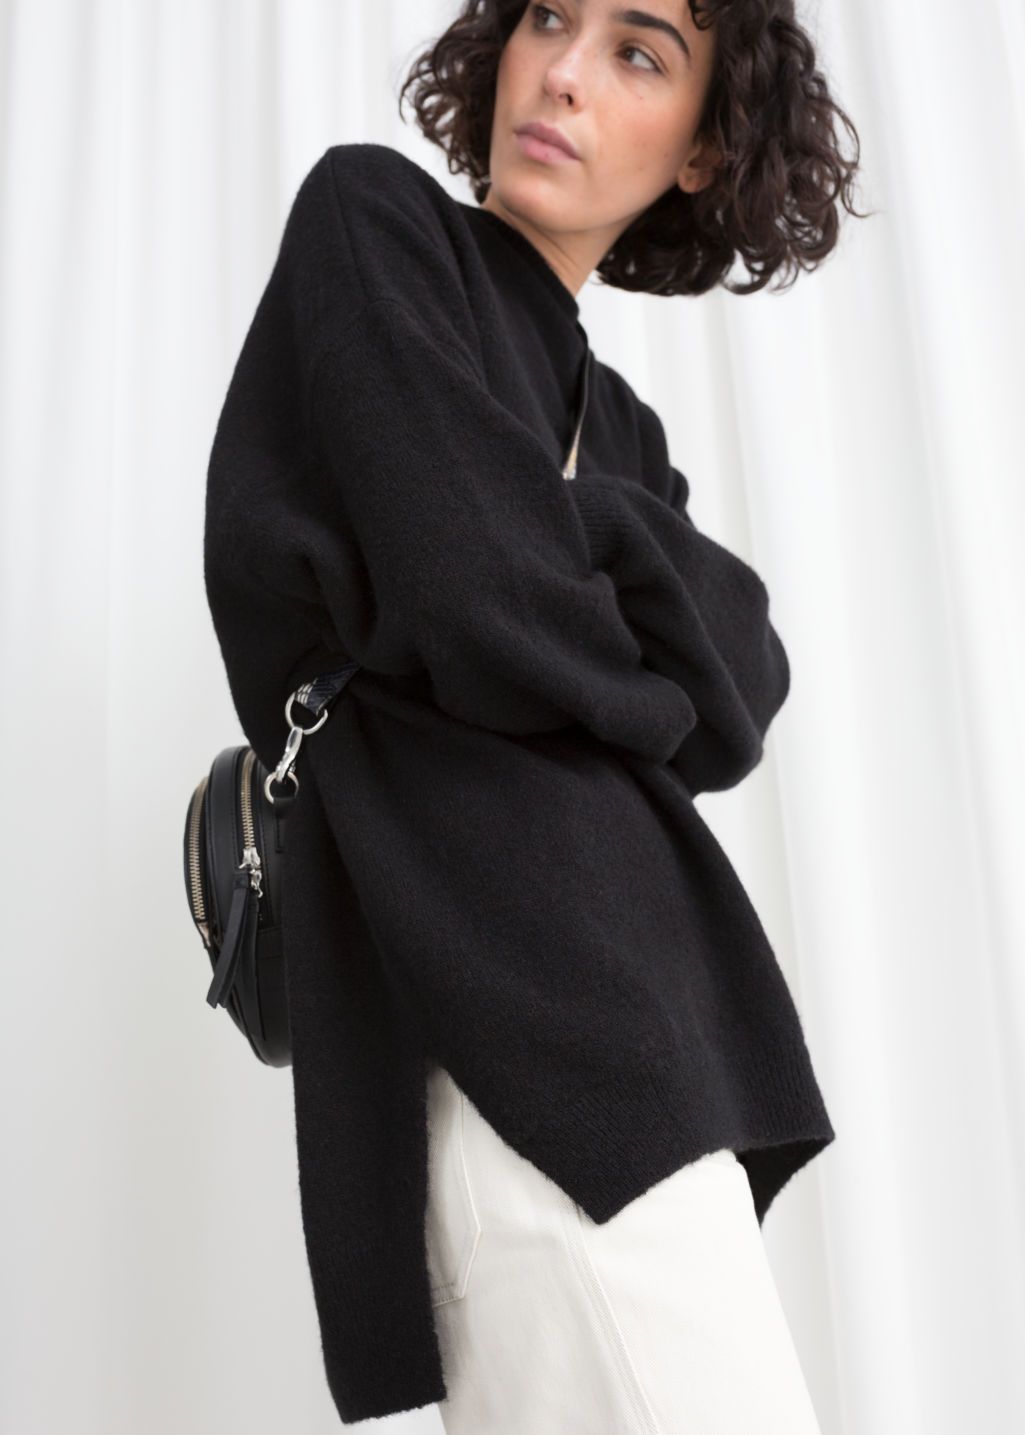 & Other Stories black oversized wool mix jumper